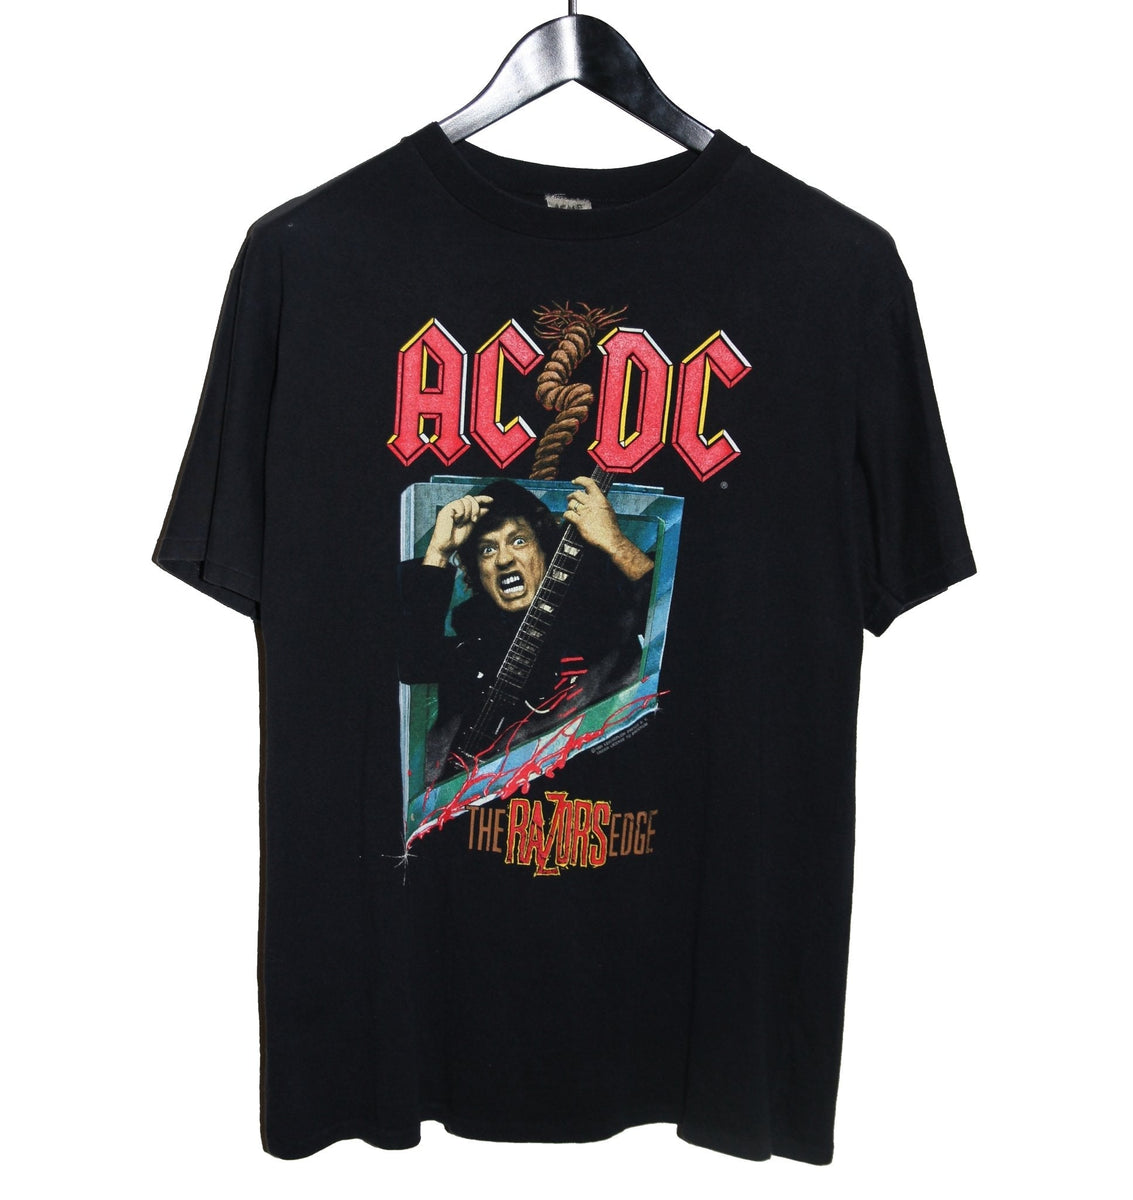 Ruined Moral education Outflow ACDC 1990 The Razor Edge Tour Shirt – Faded AU